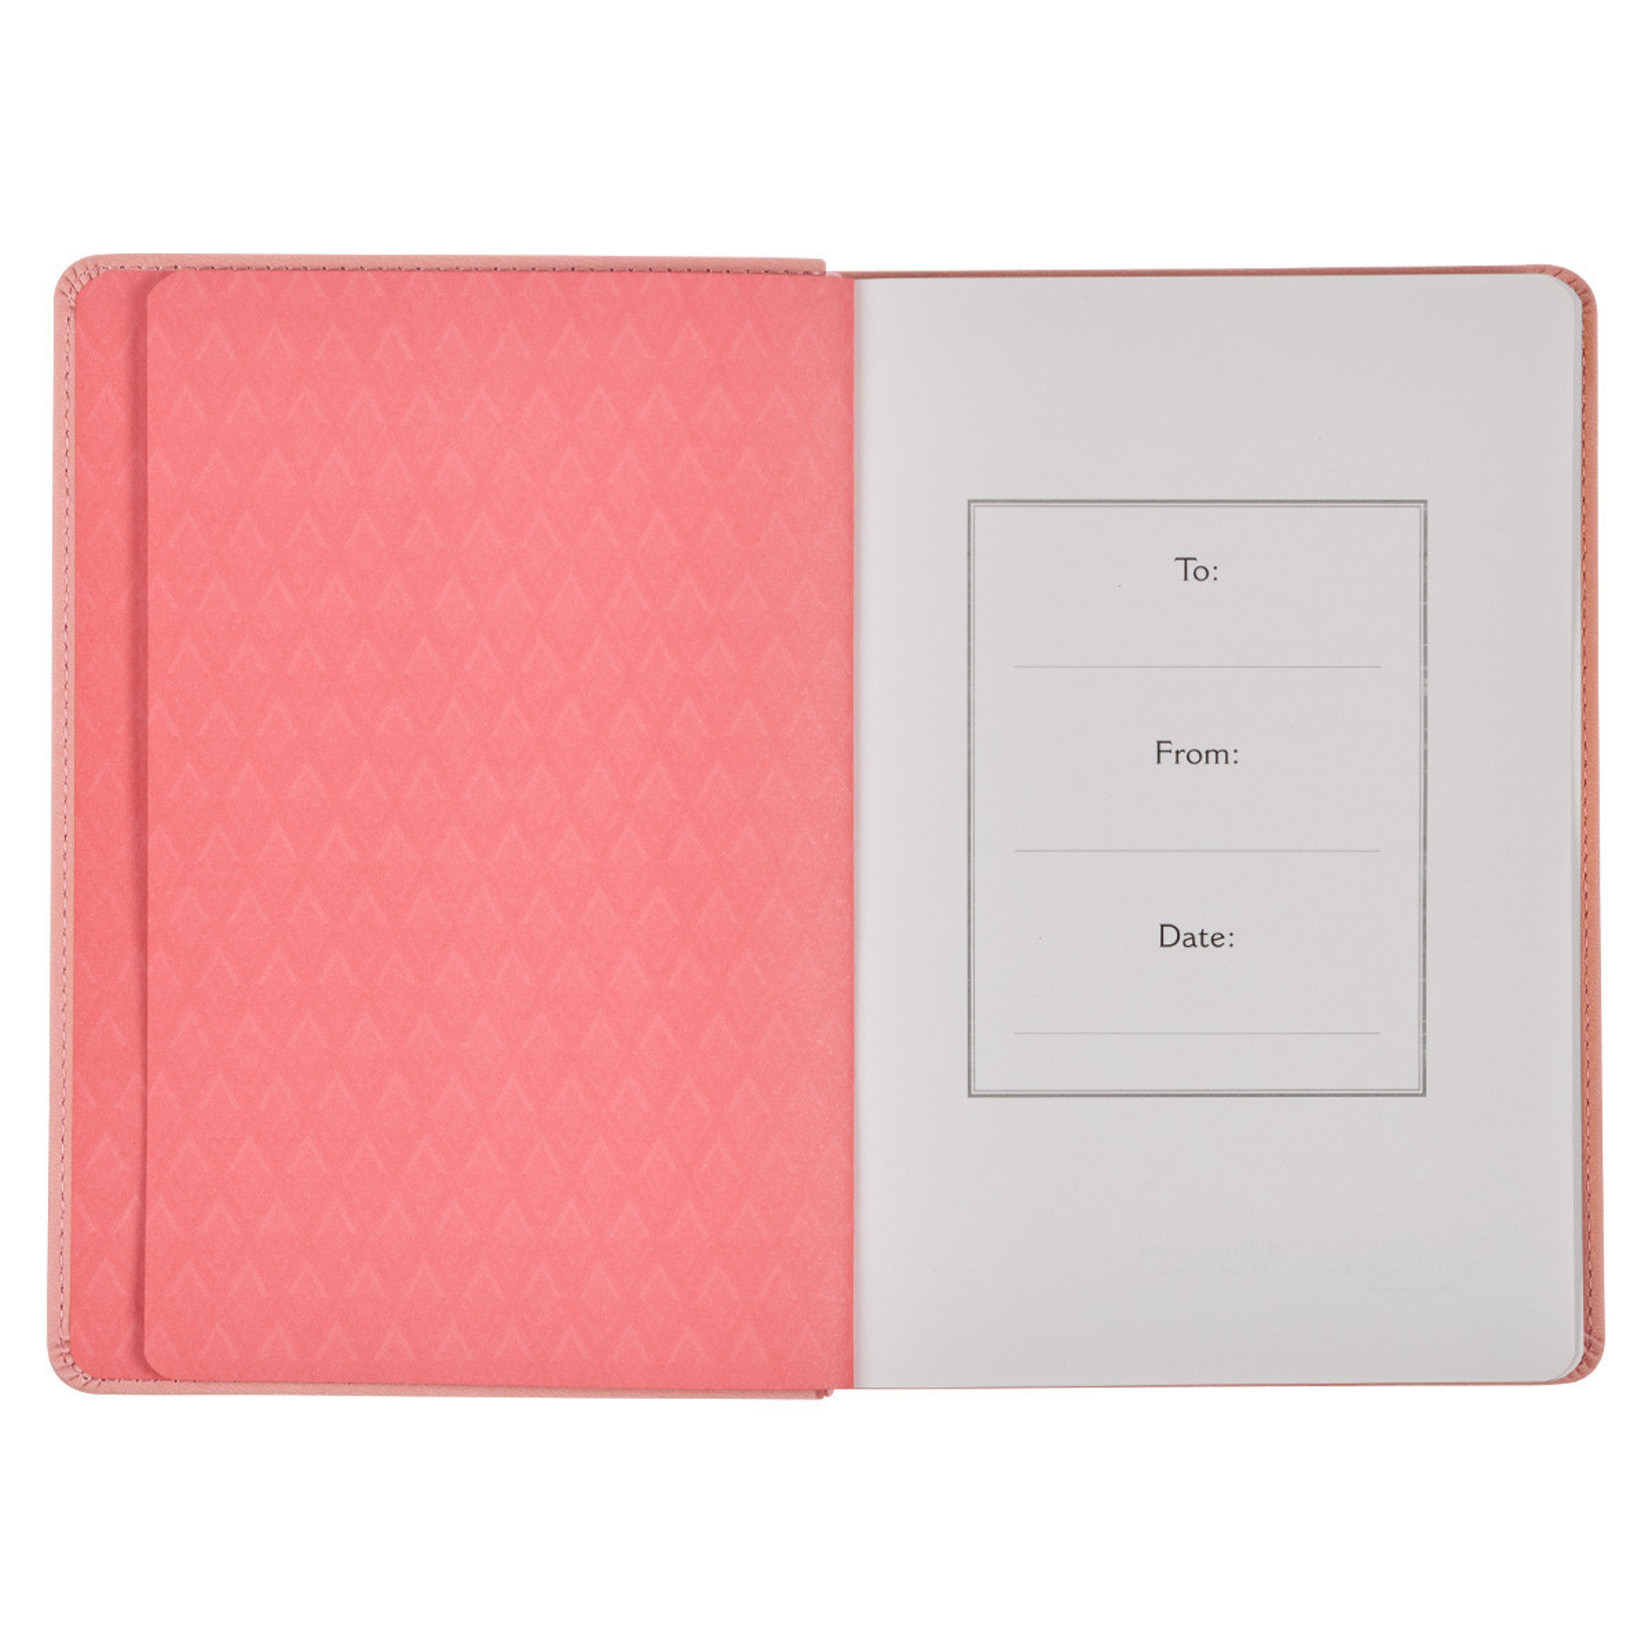 Christian Art Gifts Kindness Matters Pink Faux Leather Classic Journal